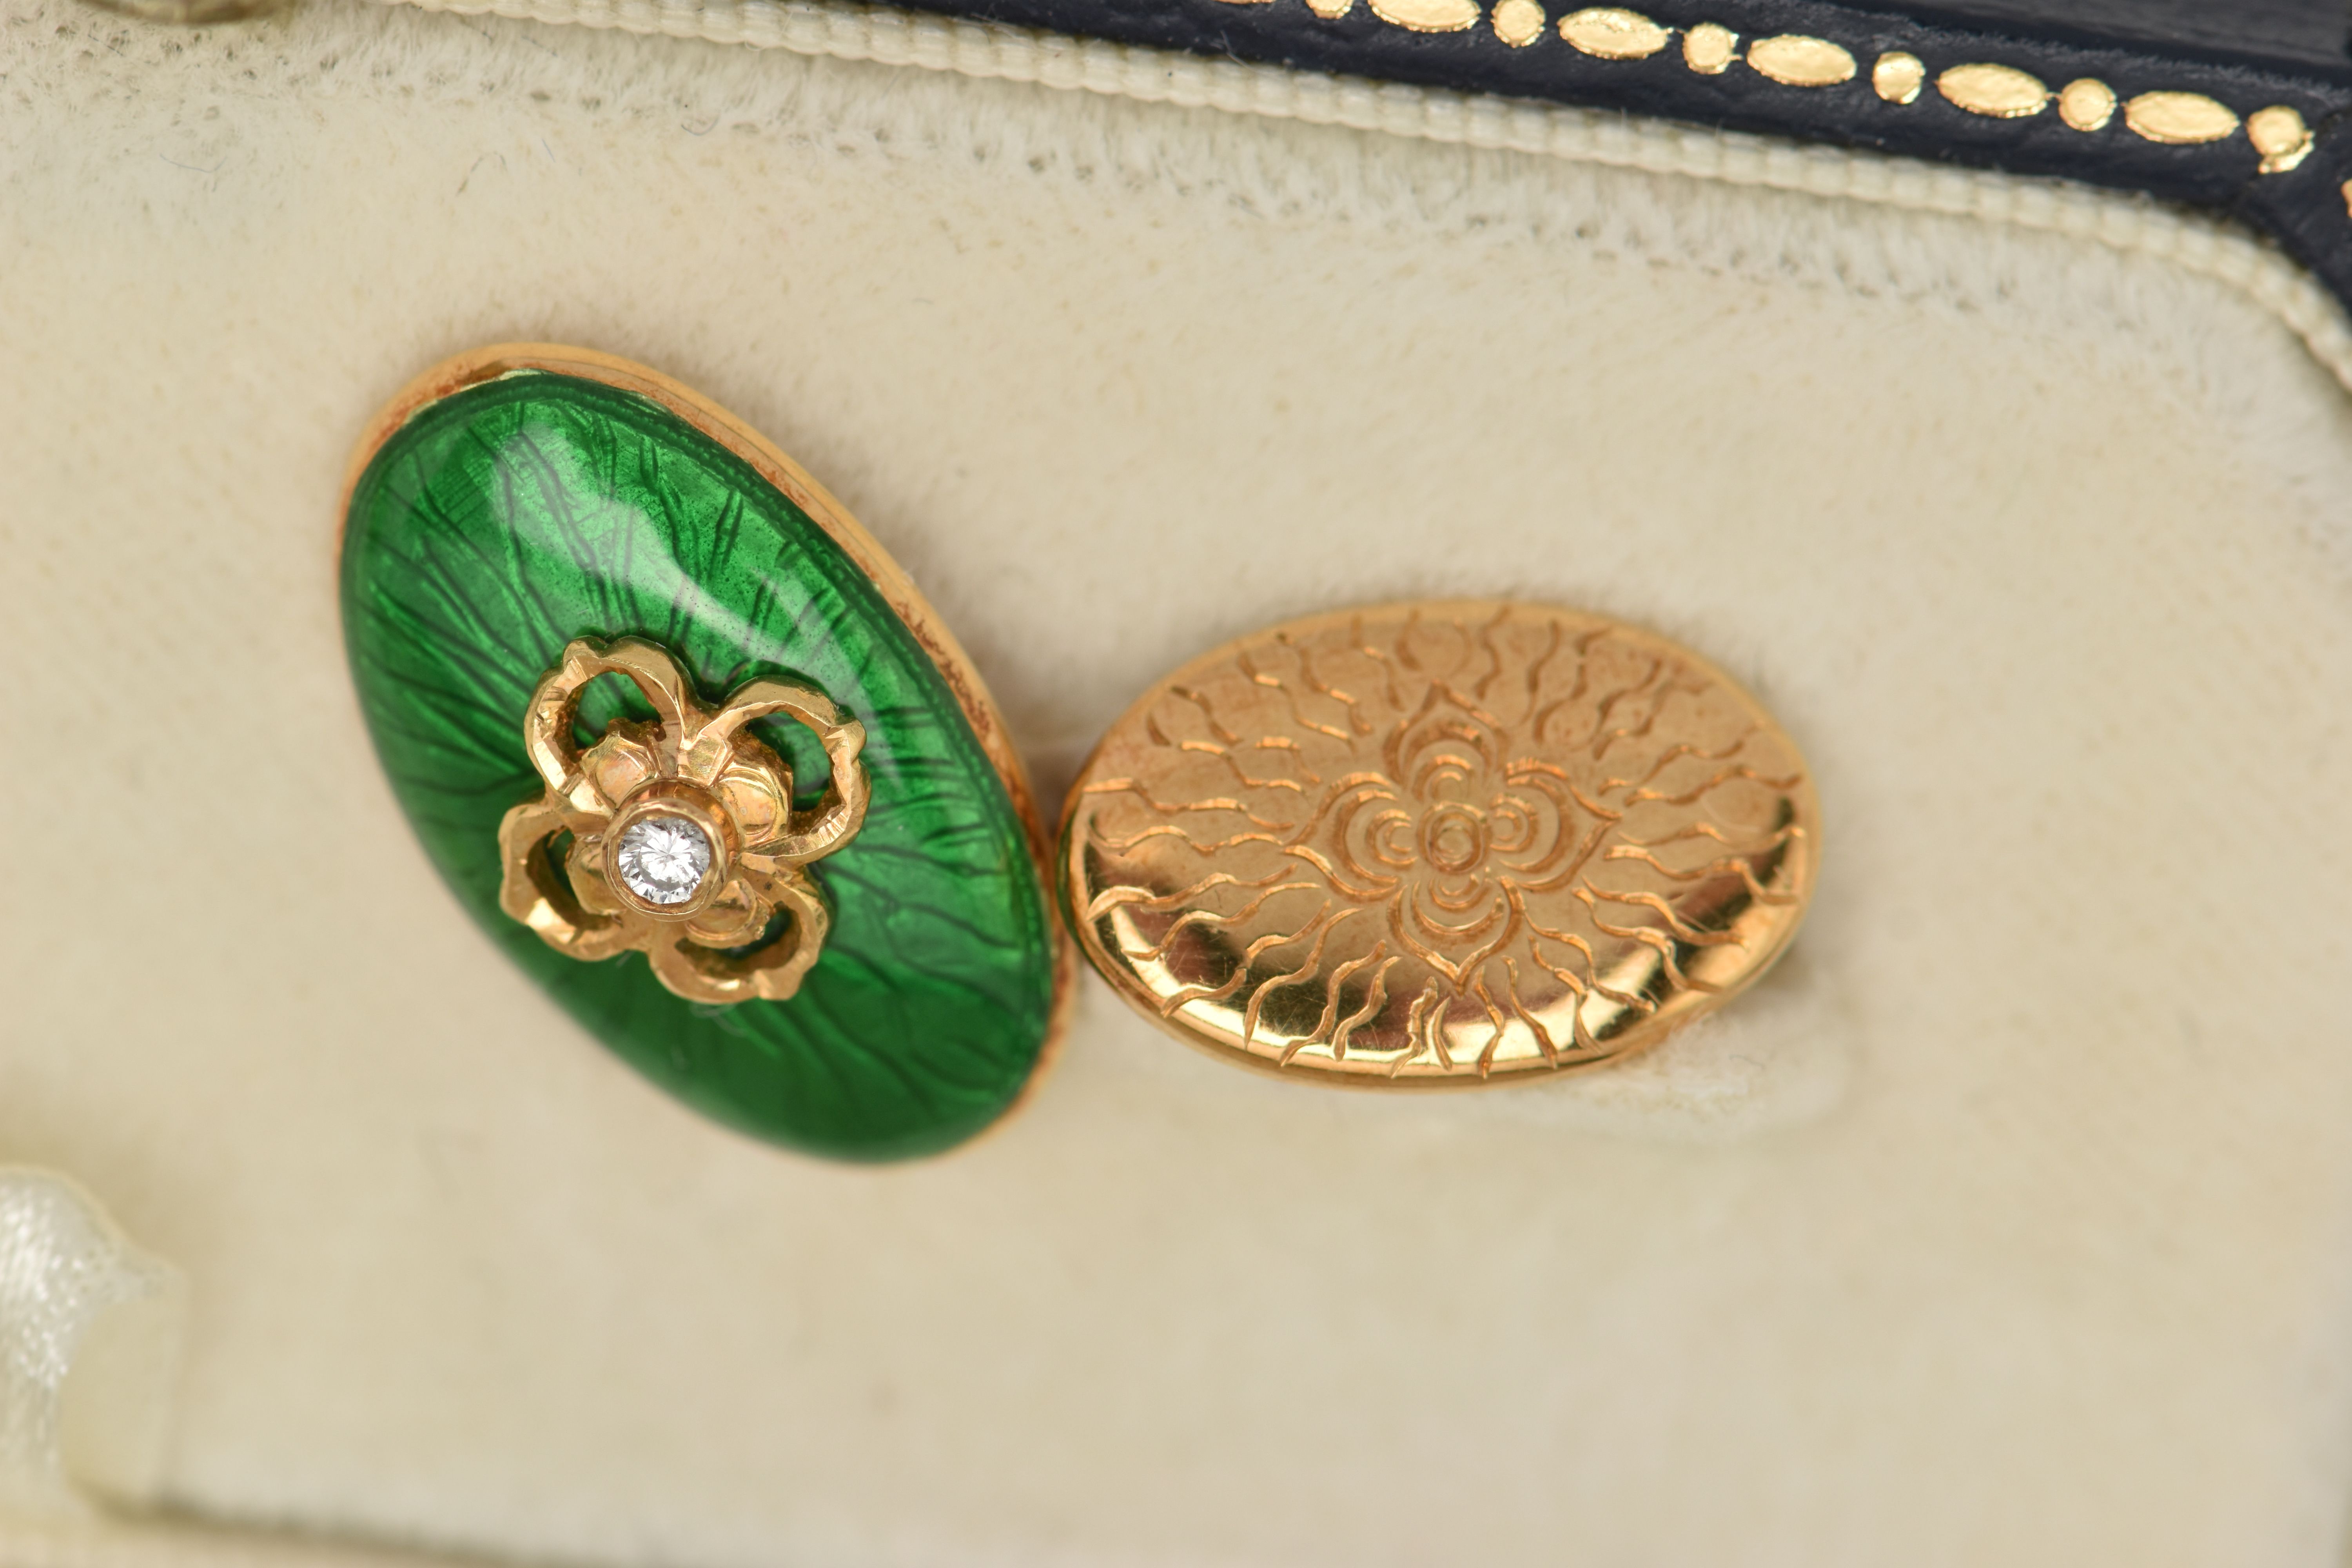 A PAIR OF 18CT GOLD ENAMEL AND DIAMOND CUFFLINKS, each designed as an oval green enamel panel with - Image 2 of 4